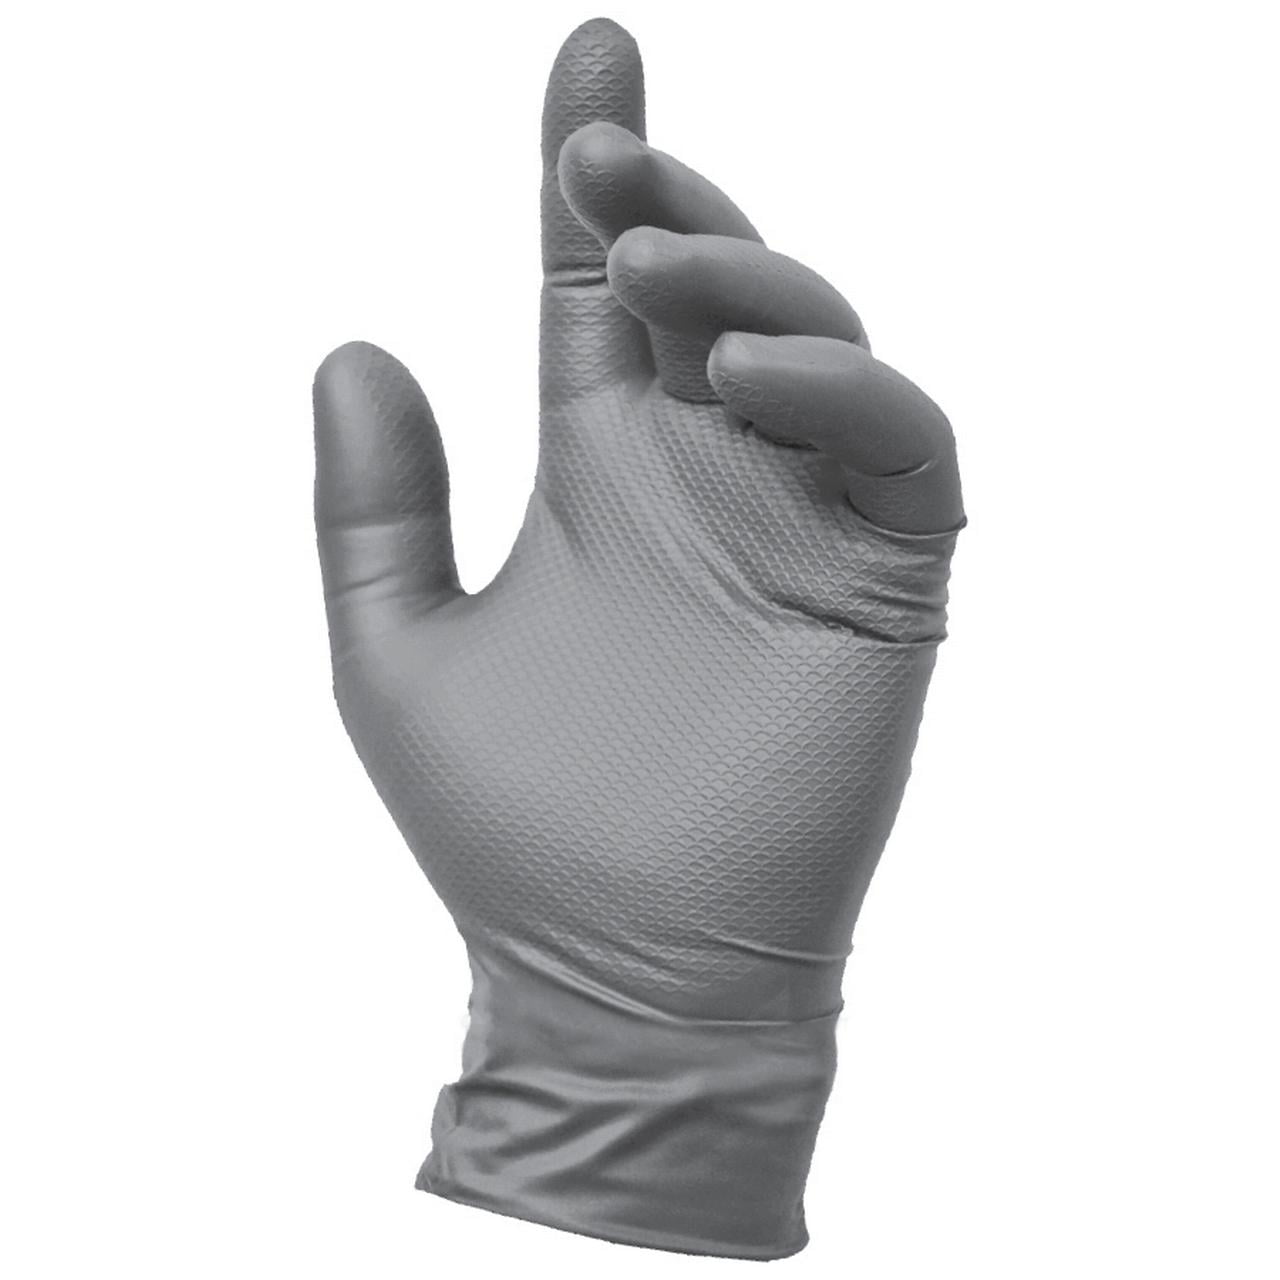 50 Ct Grease Monkey Industrial Work Disposable Gloves Nitrile Extra Grip Size L 